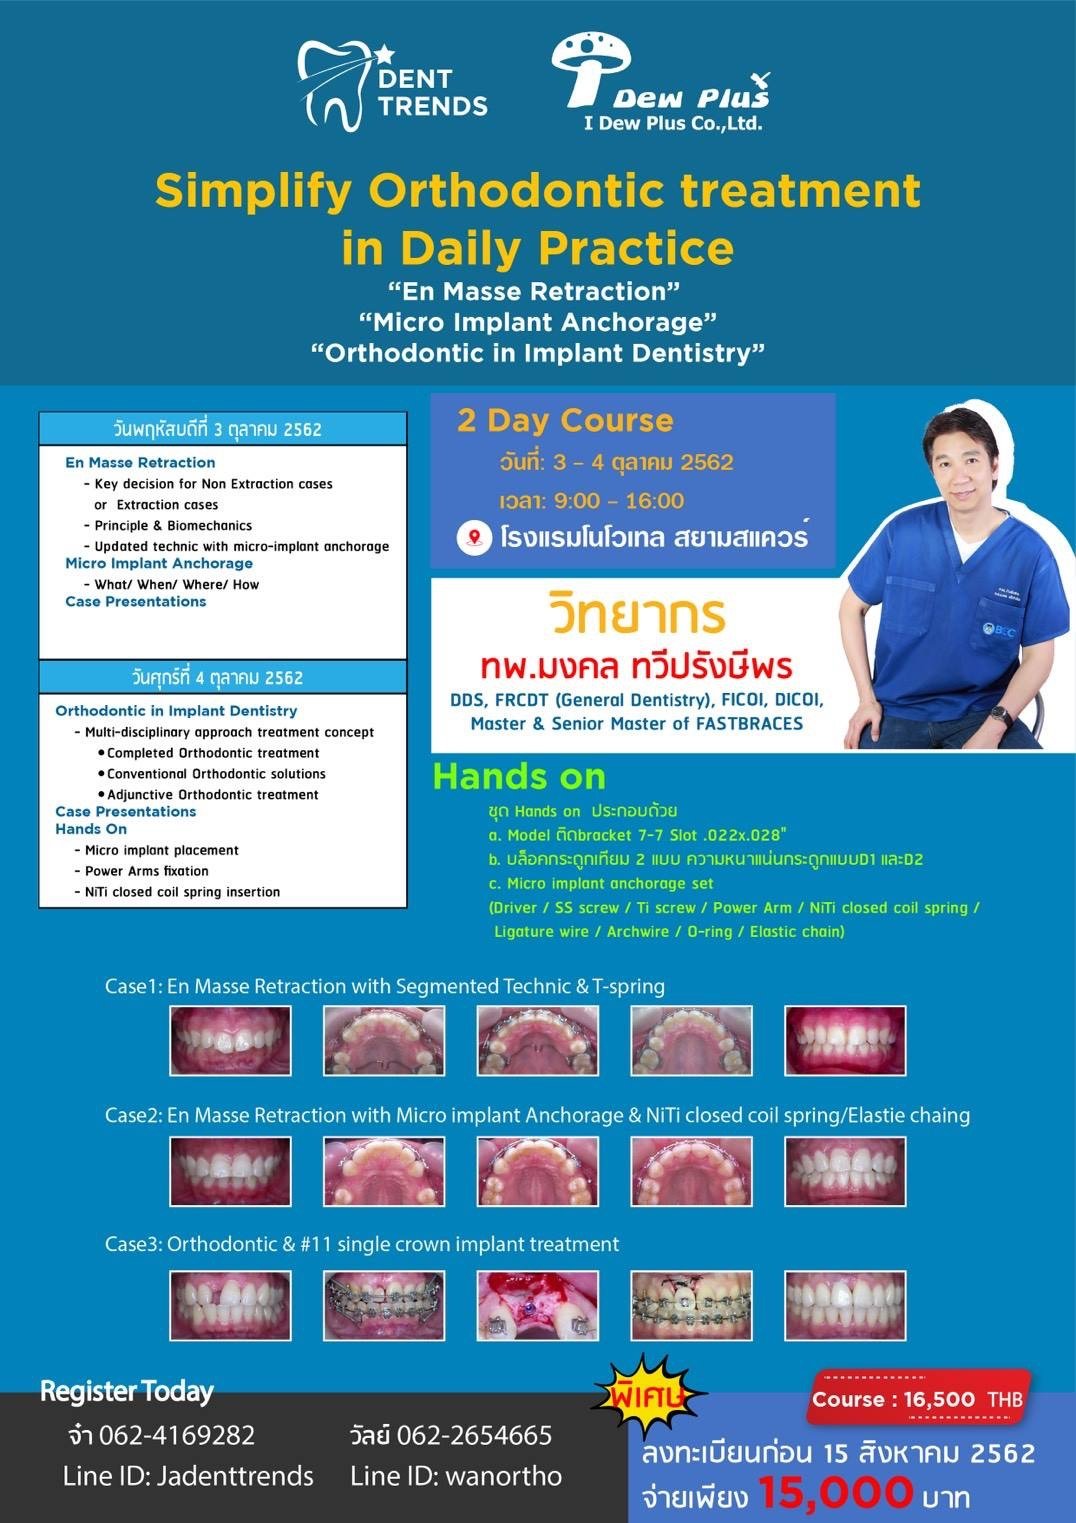 Simplify Orthodontic treatment in Daily Practice